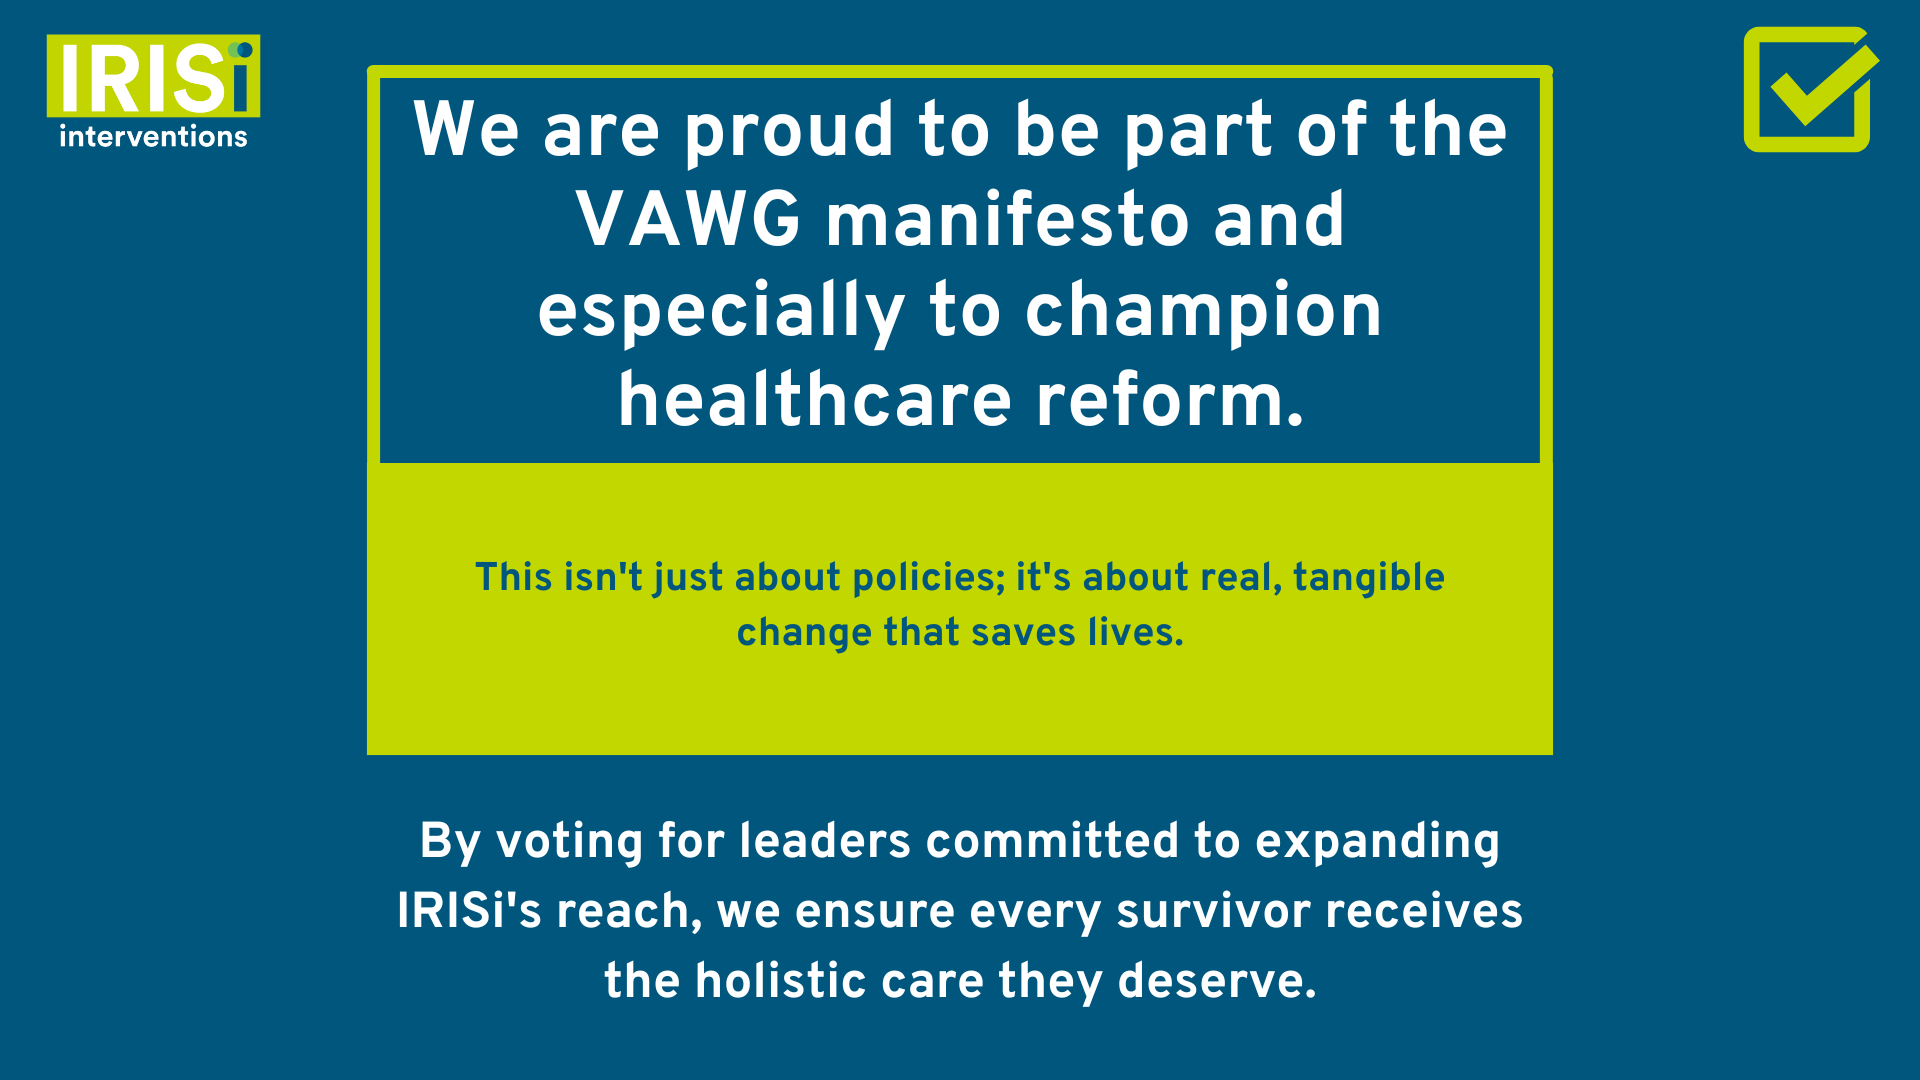 Healthcare professionals, equipped by IRISi interventions, are at the frontline of supporting VAWG survivors. Our votes can ensure these vital tools and trainings become standard in every healthcare setting. Let's make a difference this election!